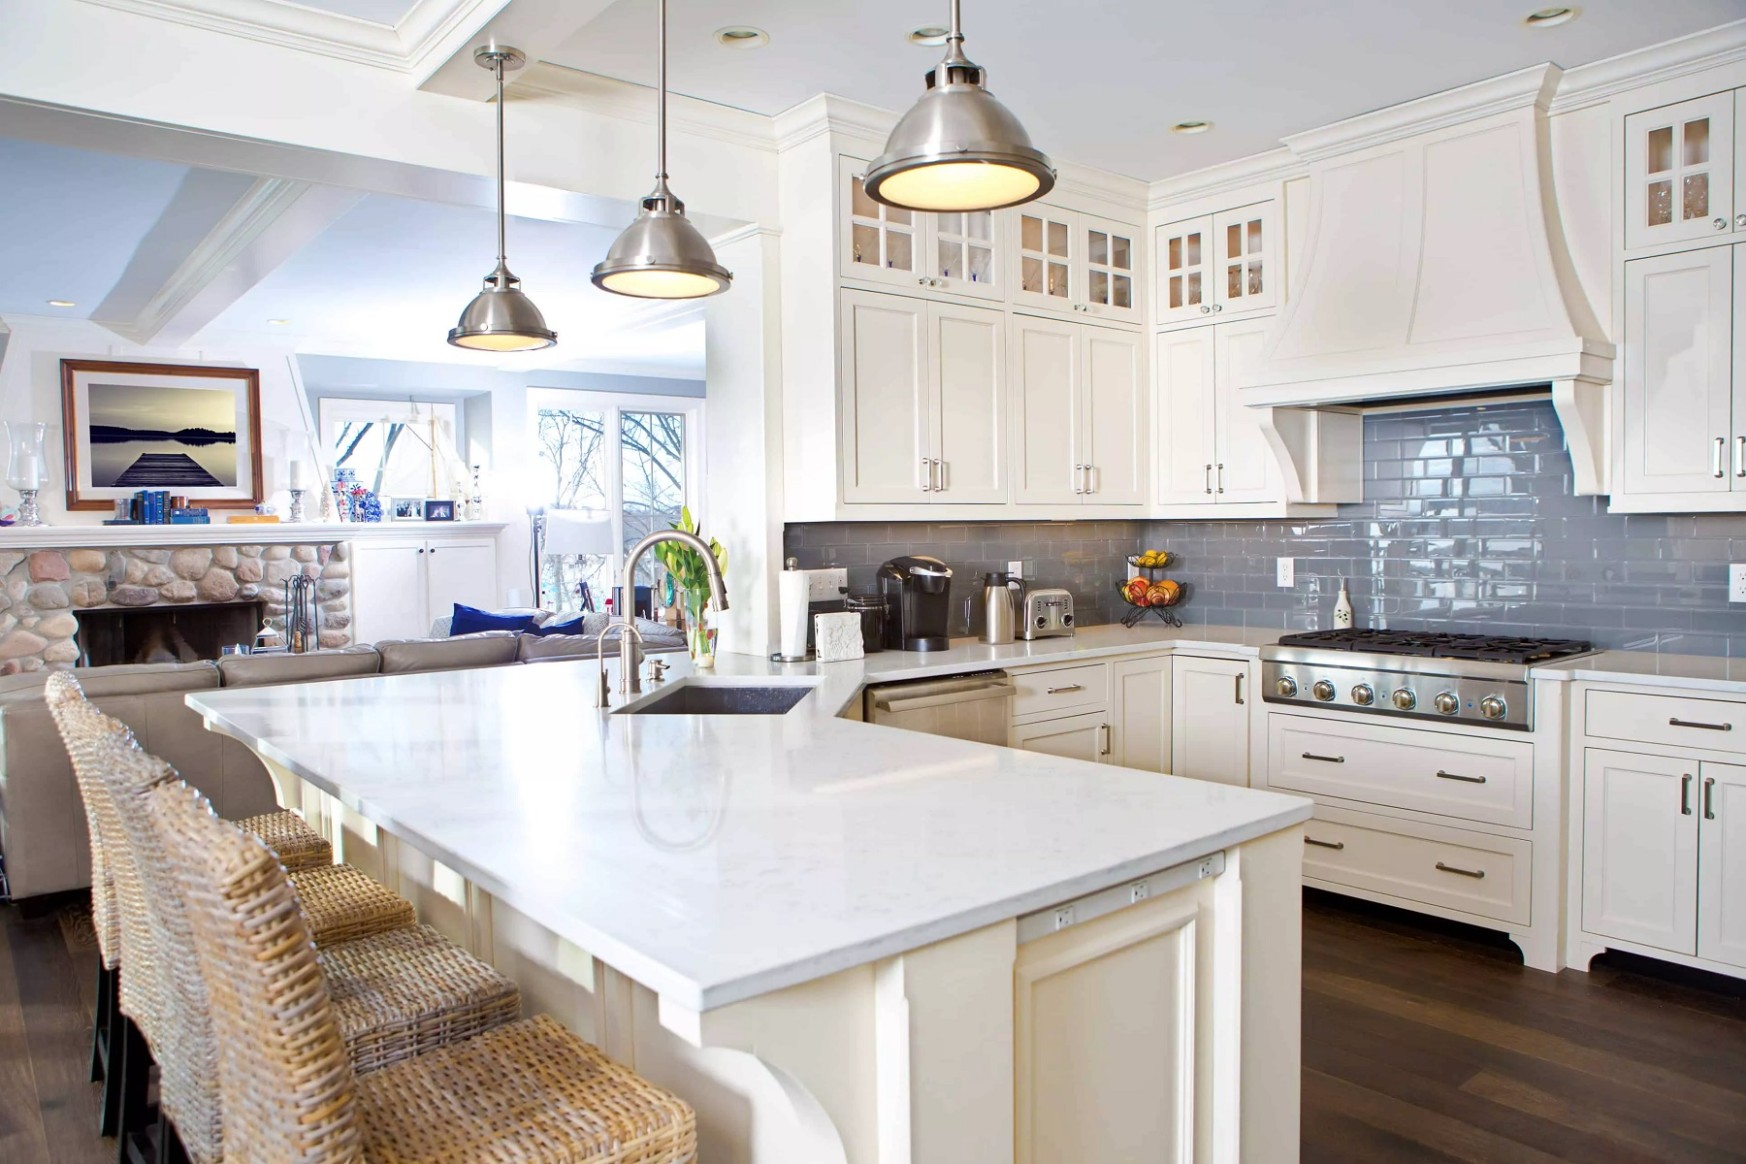 How Much Does Quartz Countertops Cost? - 4 Cost Guide - how much does kitchen countertop cost?